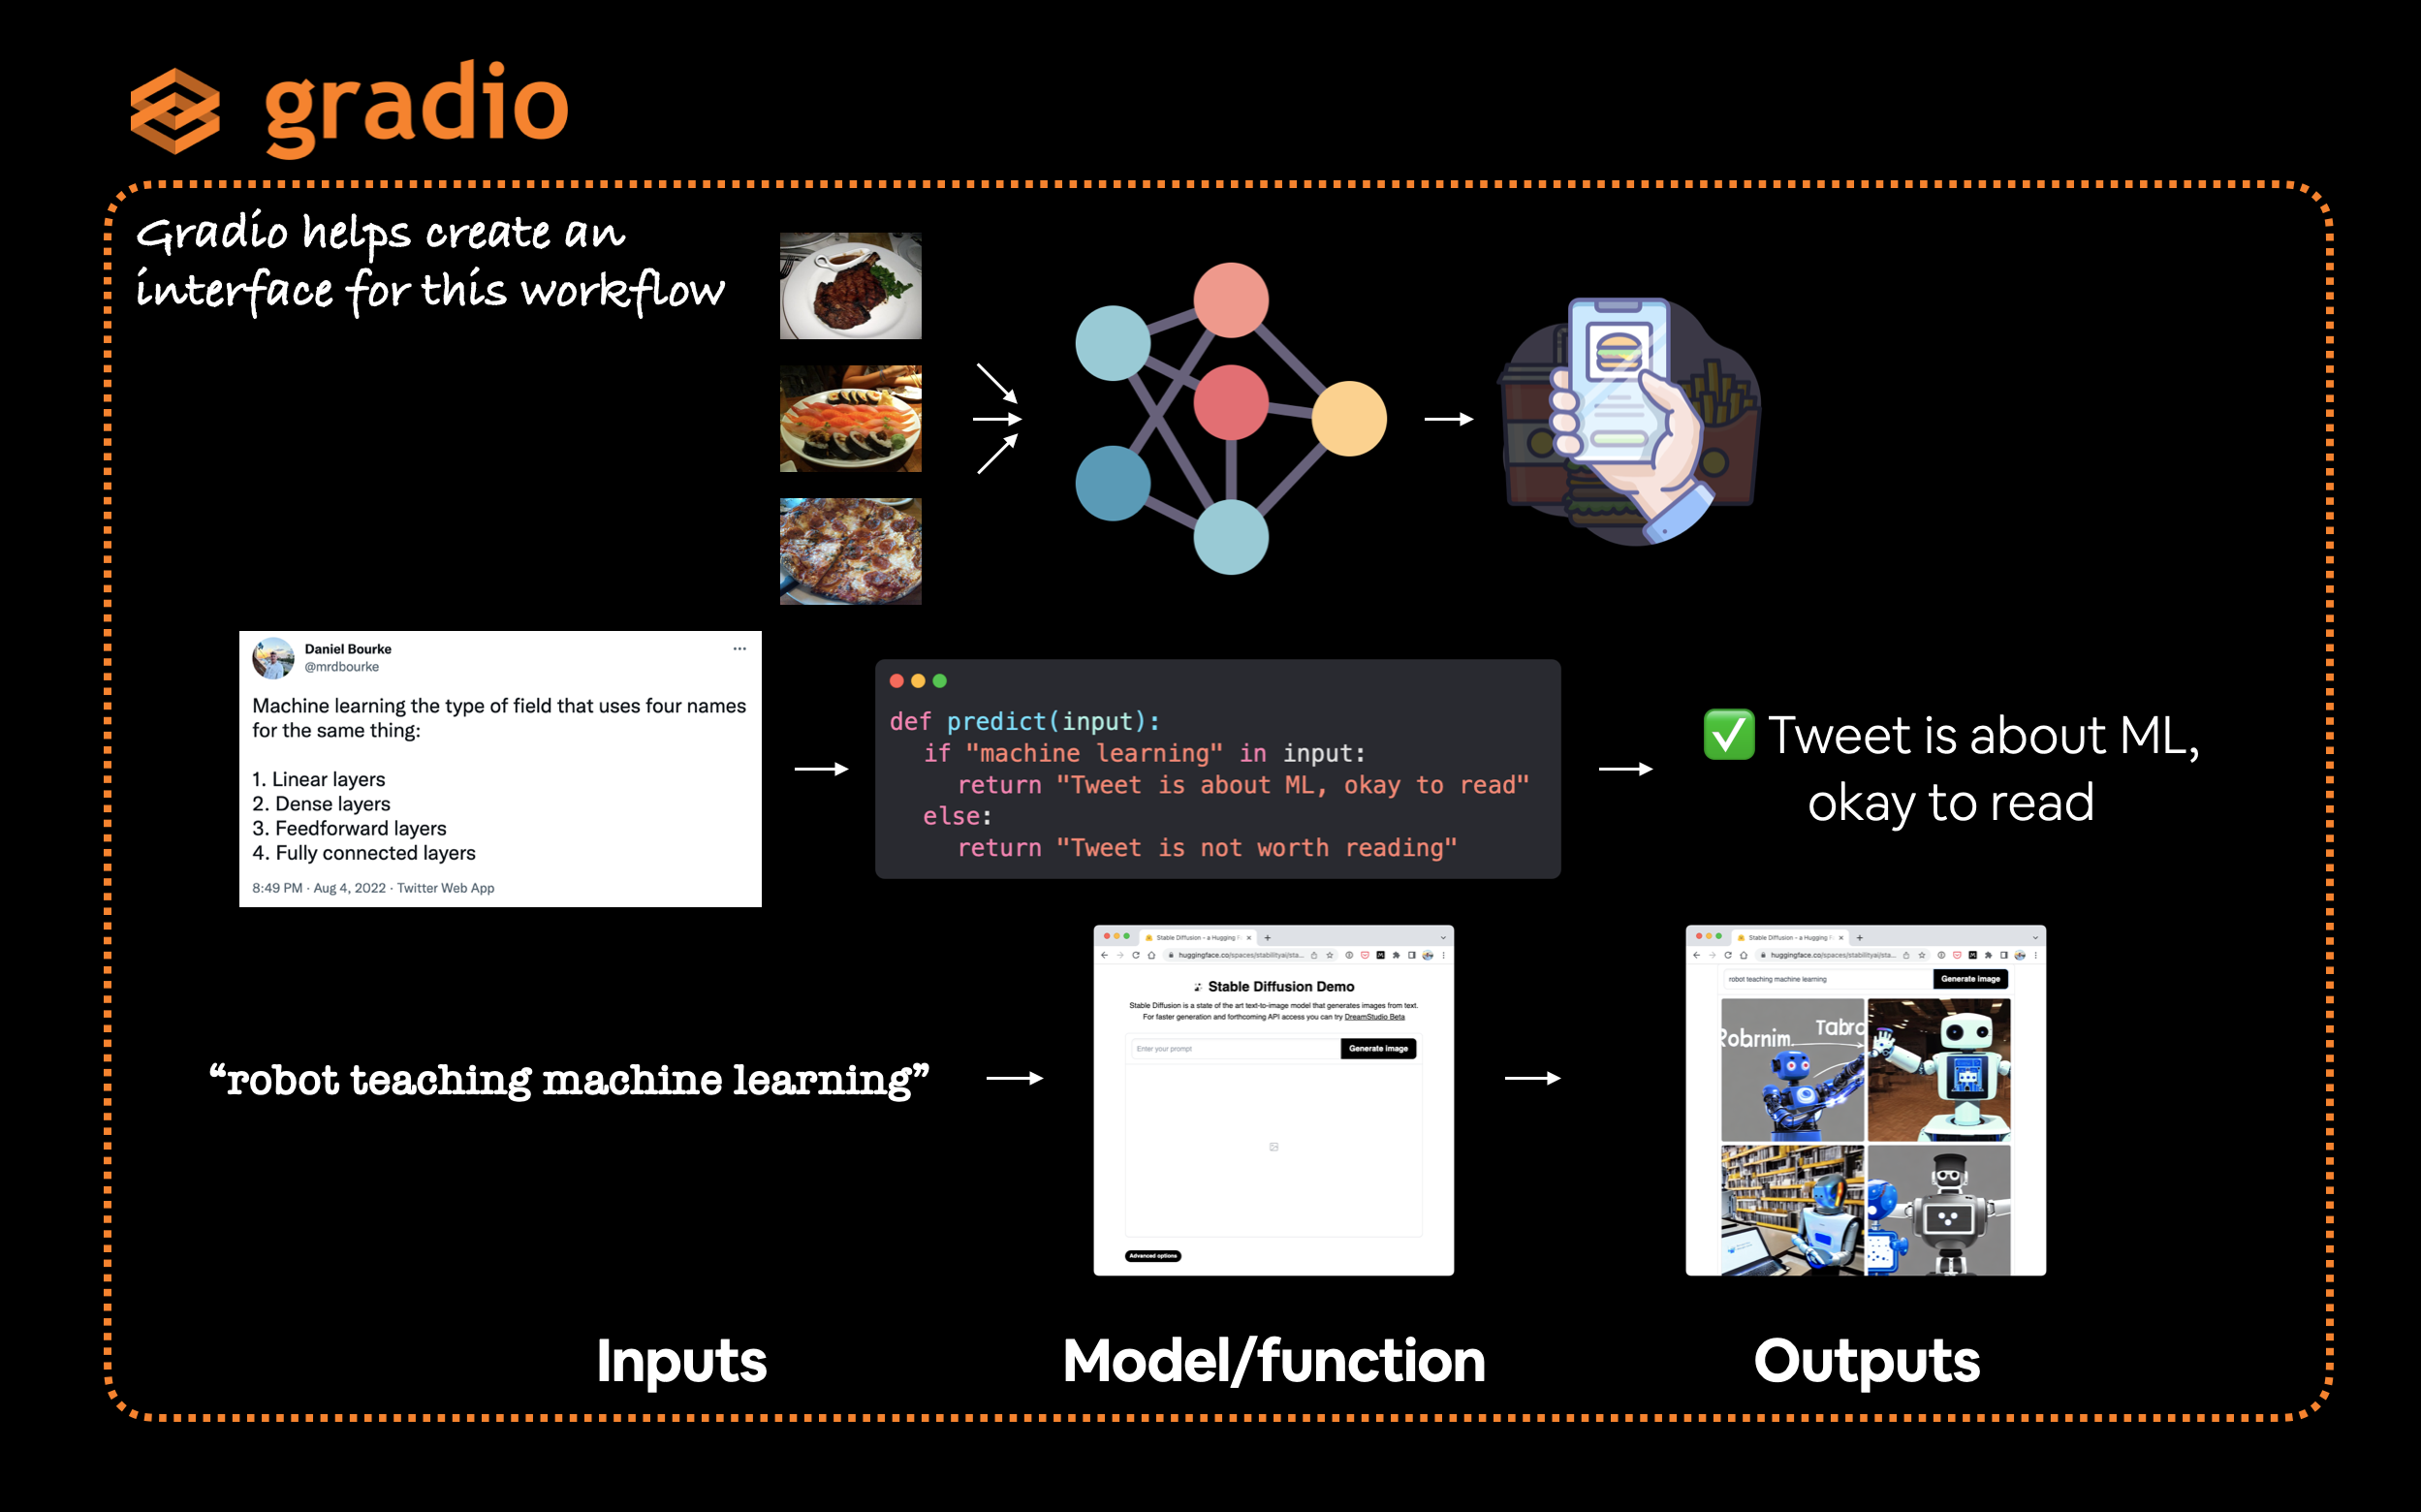 gradio workflow of inputs flowing into some kind of model or function and then producing outputs